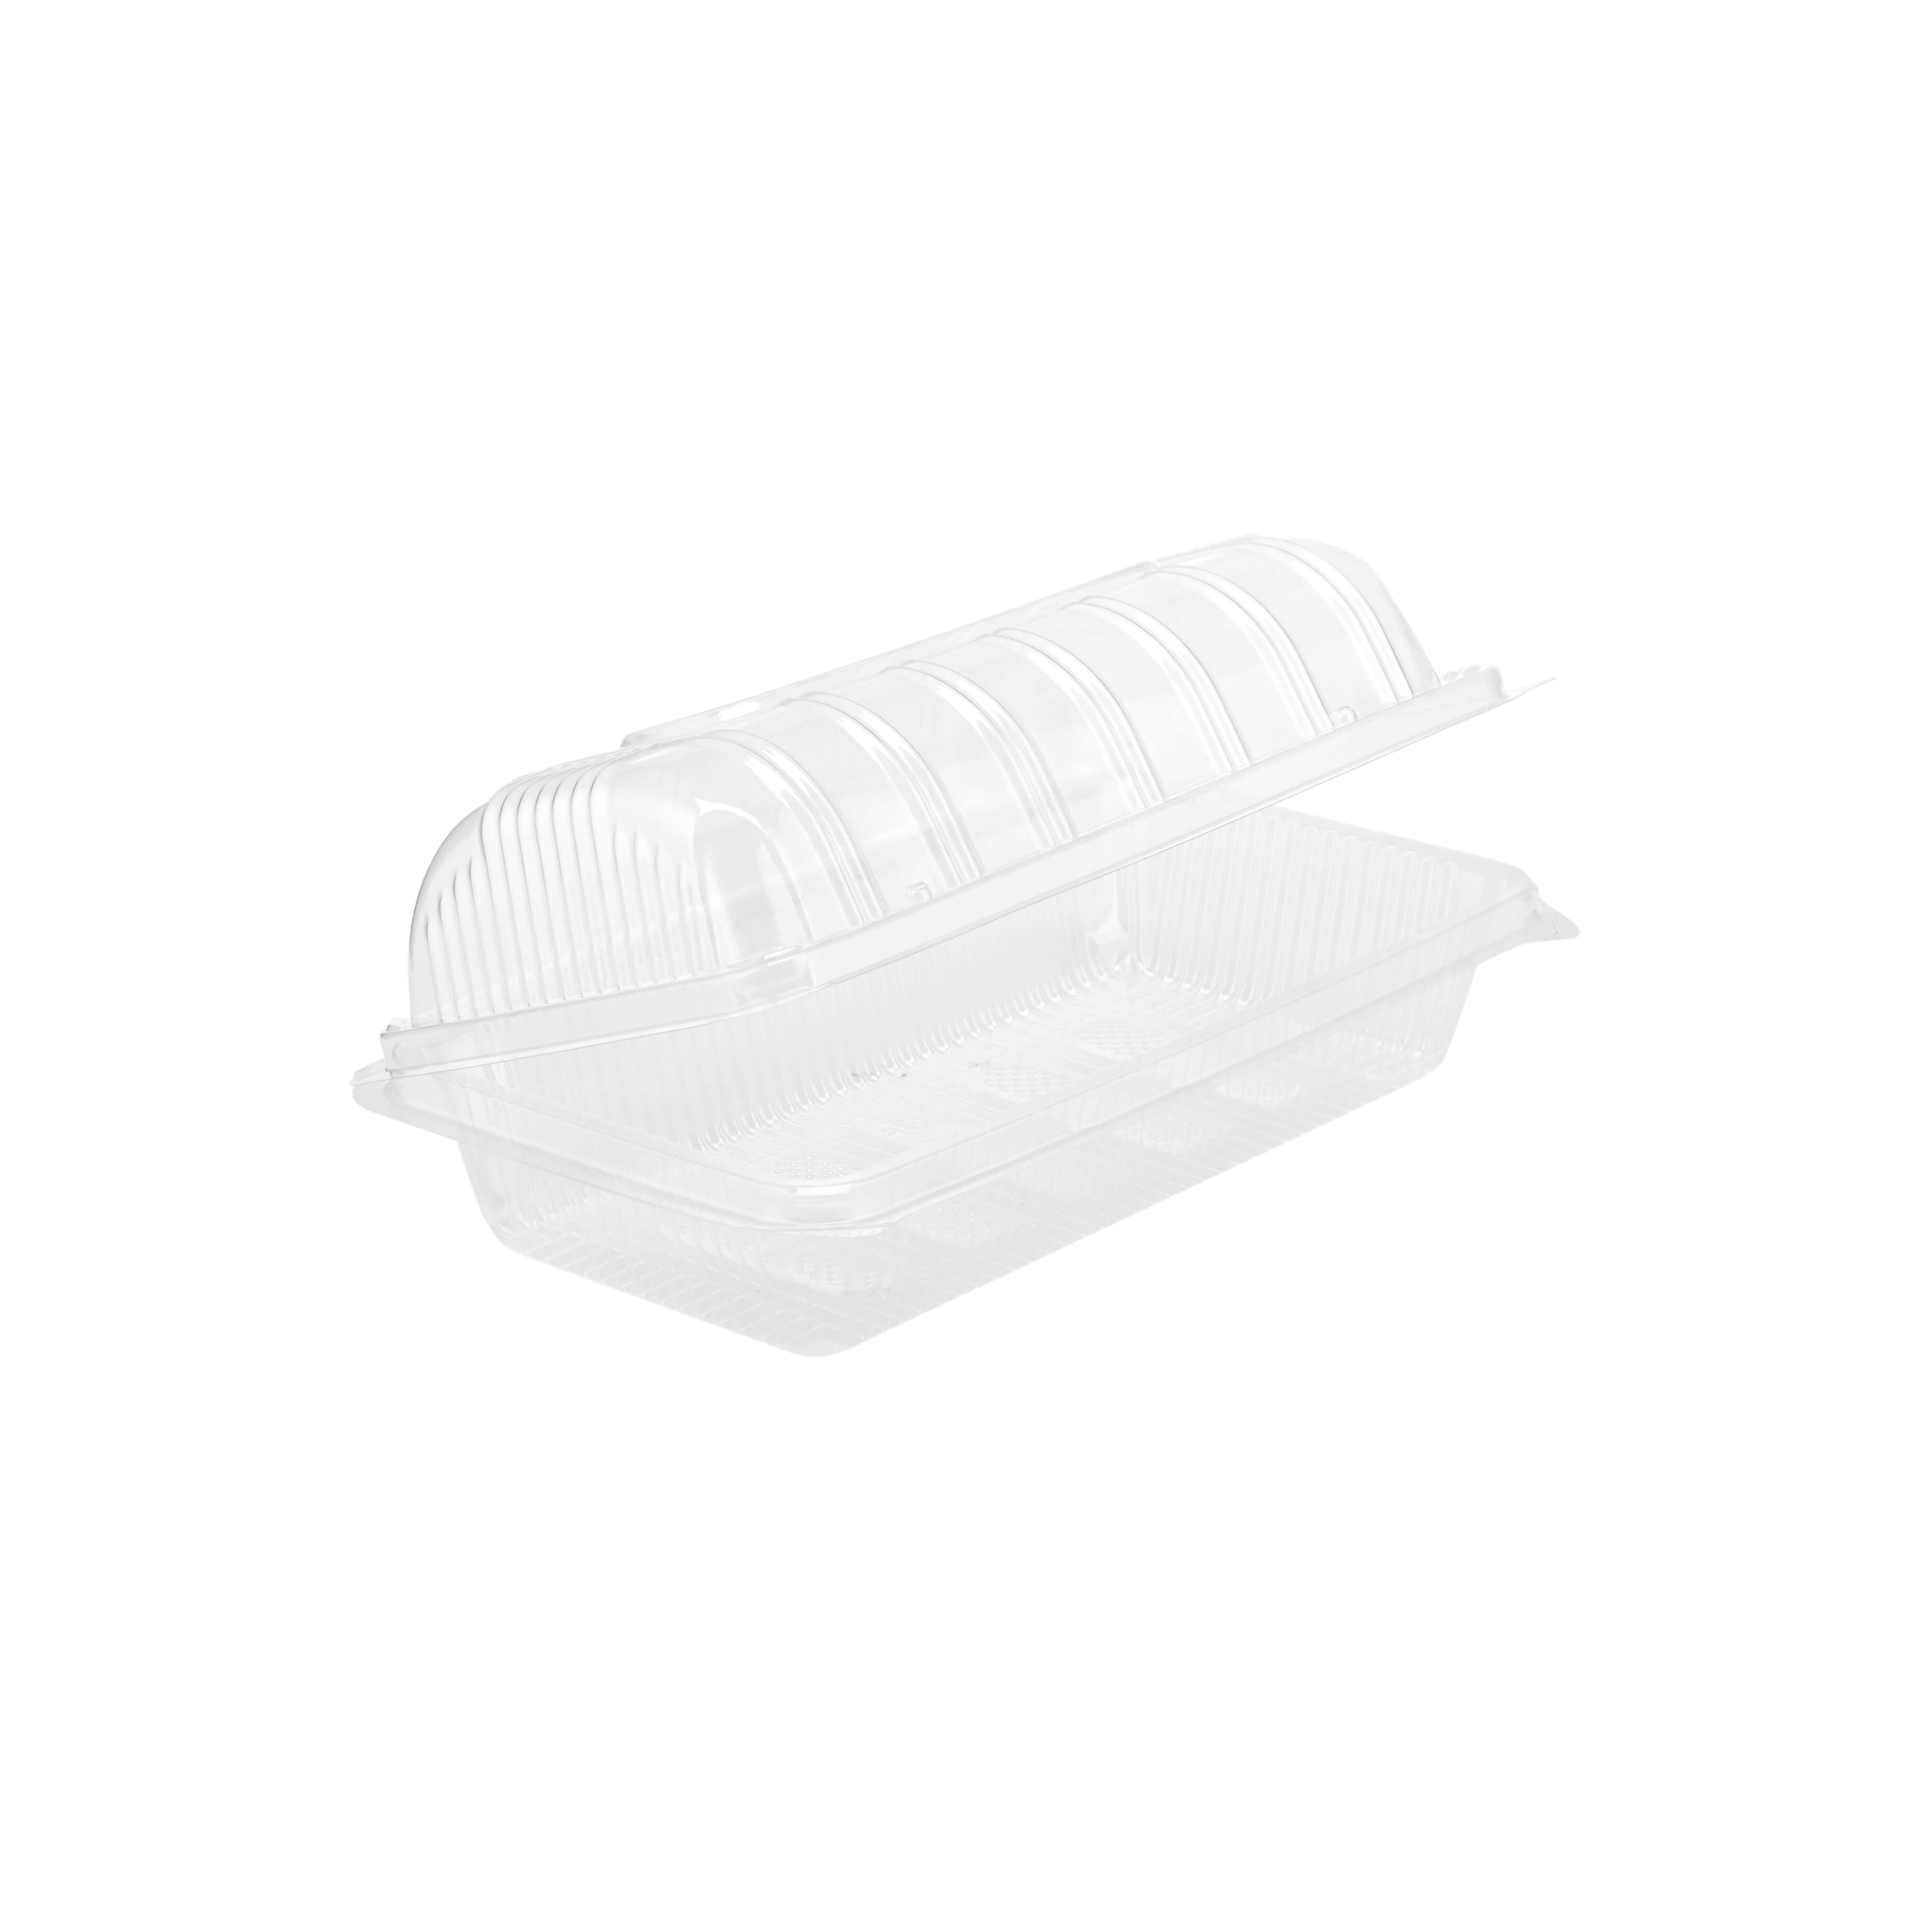 Practical rectangular clear container for bakery and deli items 500ml - Hotpack Global